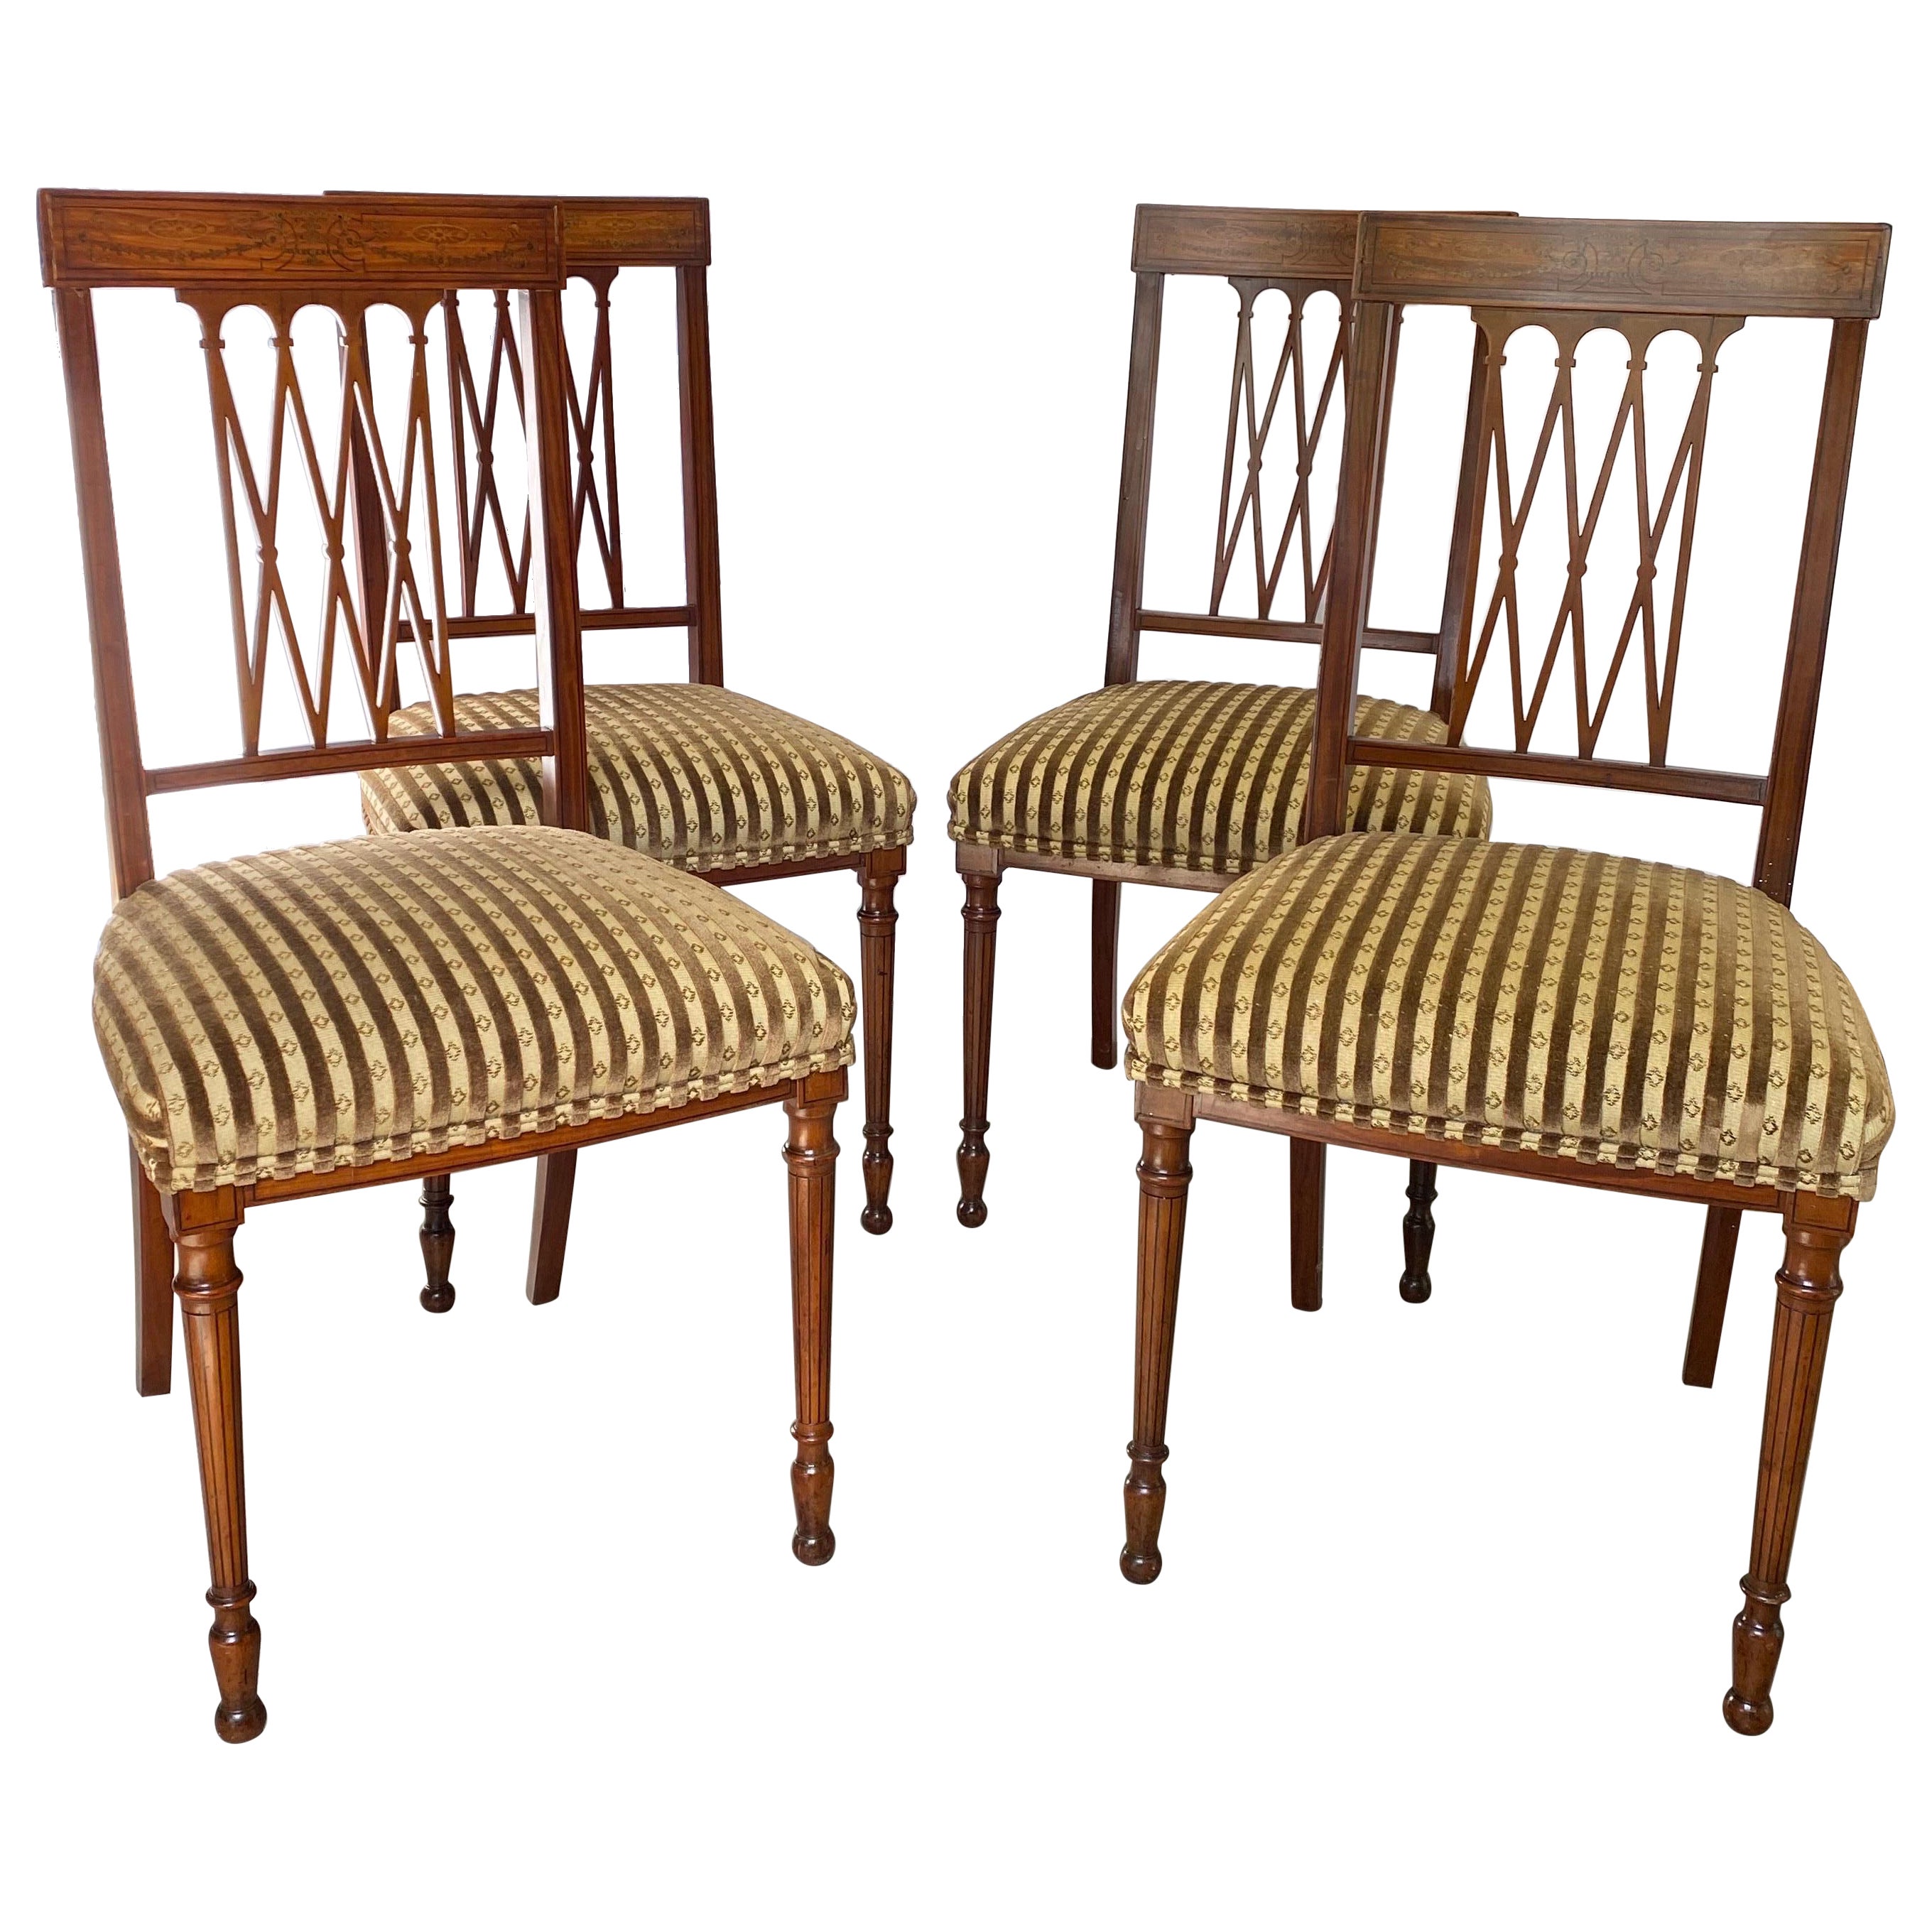 A Set of Four Antique Edwardian Inlaid Side Chairs 